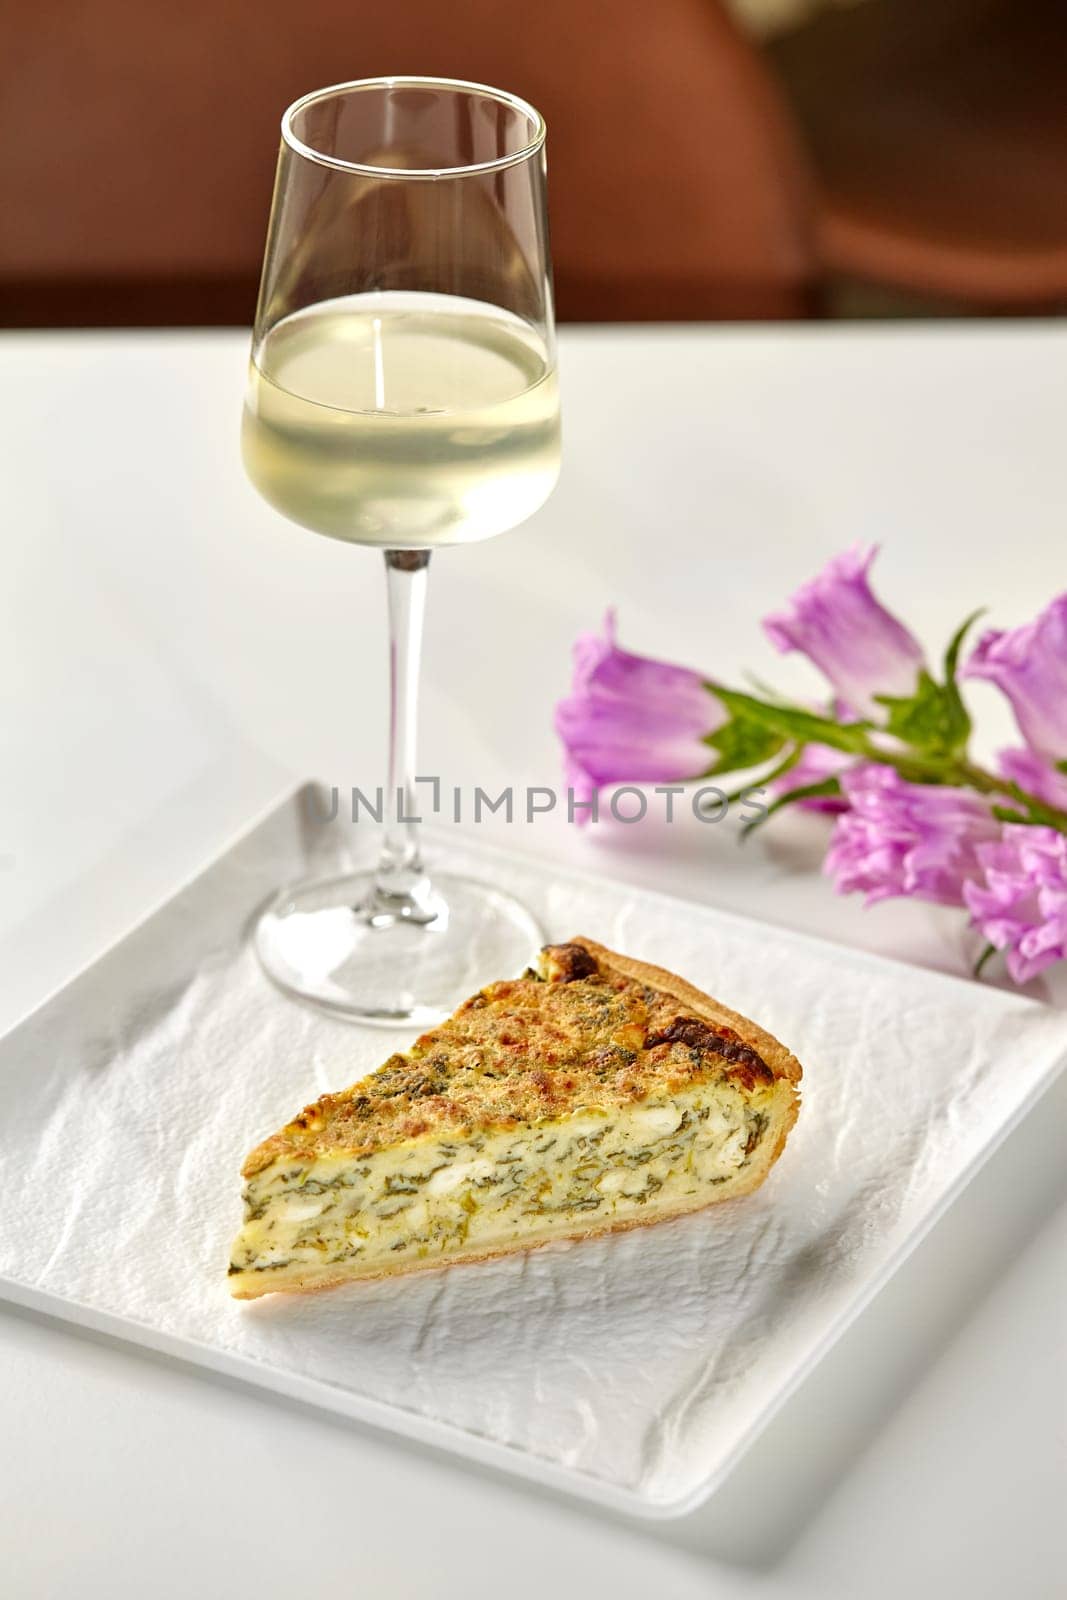 Romantic dining setting featuring piece of Quiche Lorraine filled with savory custard, cheese and spinach served with glass of white wine, decorated with sprig of purple bellflowers